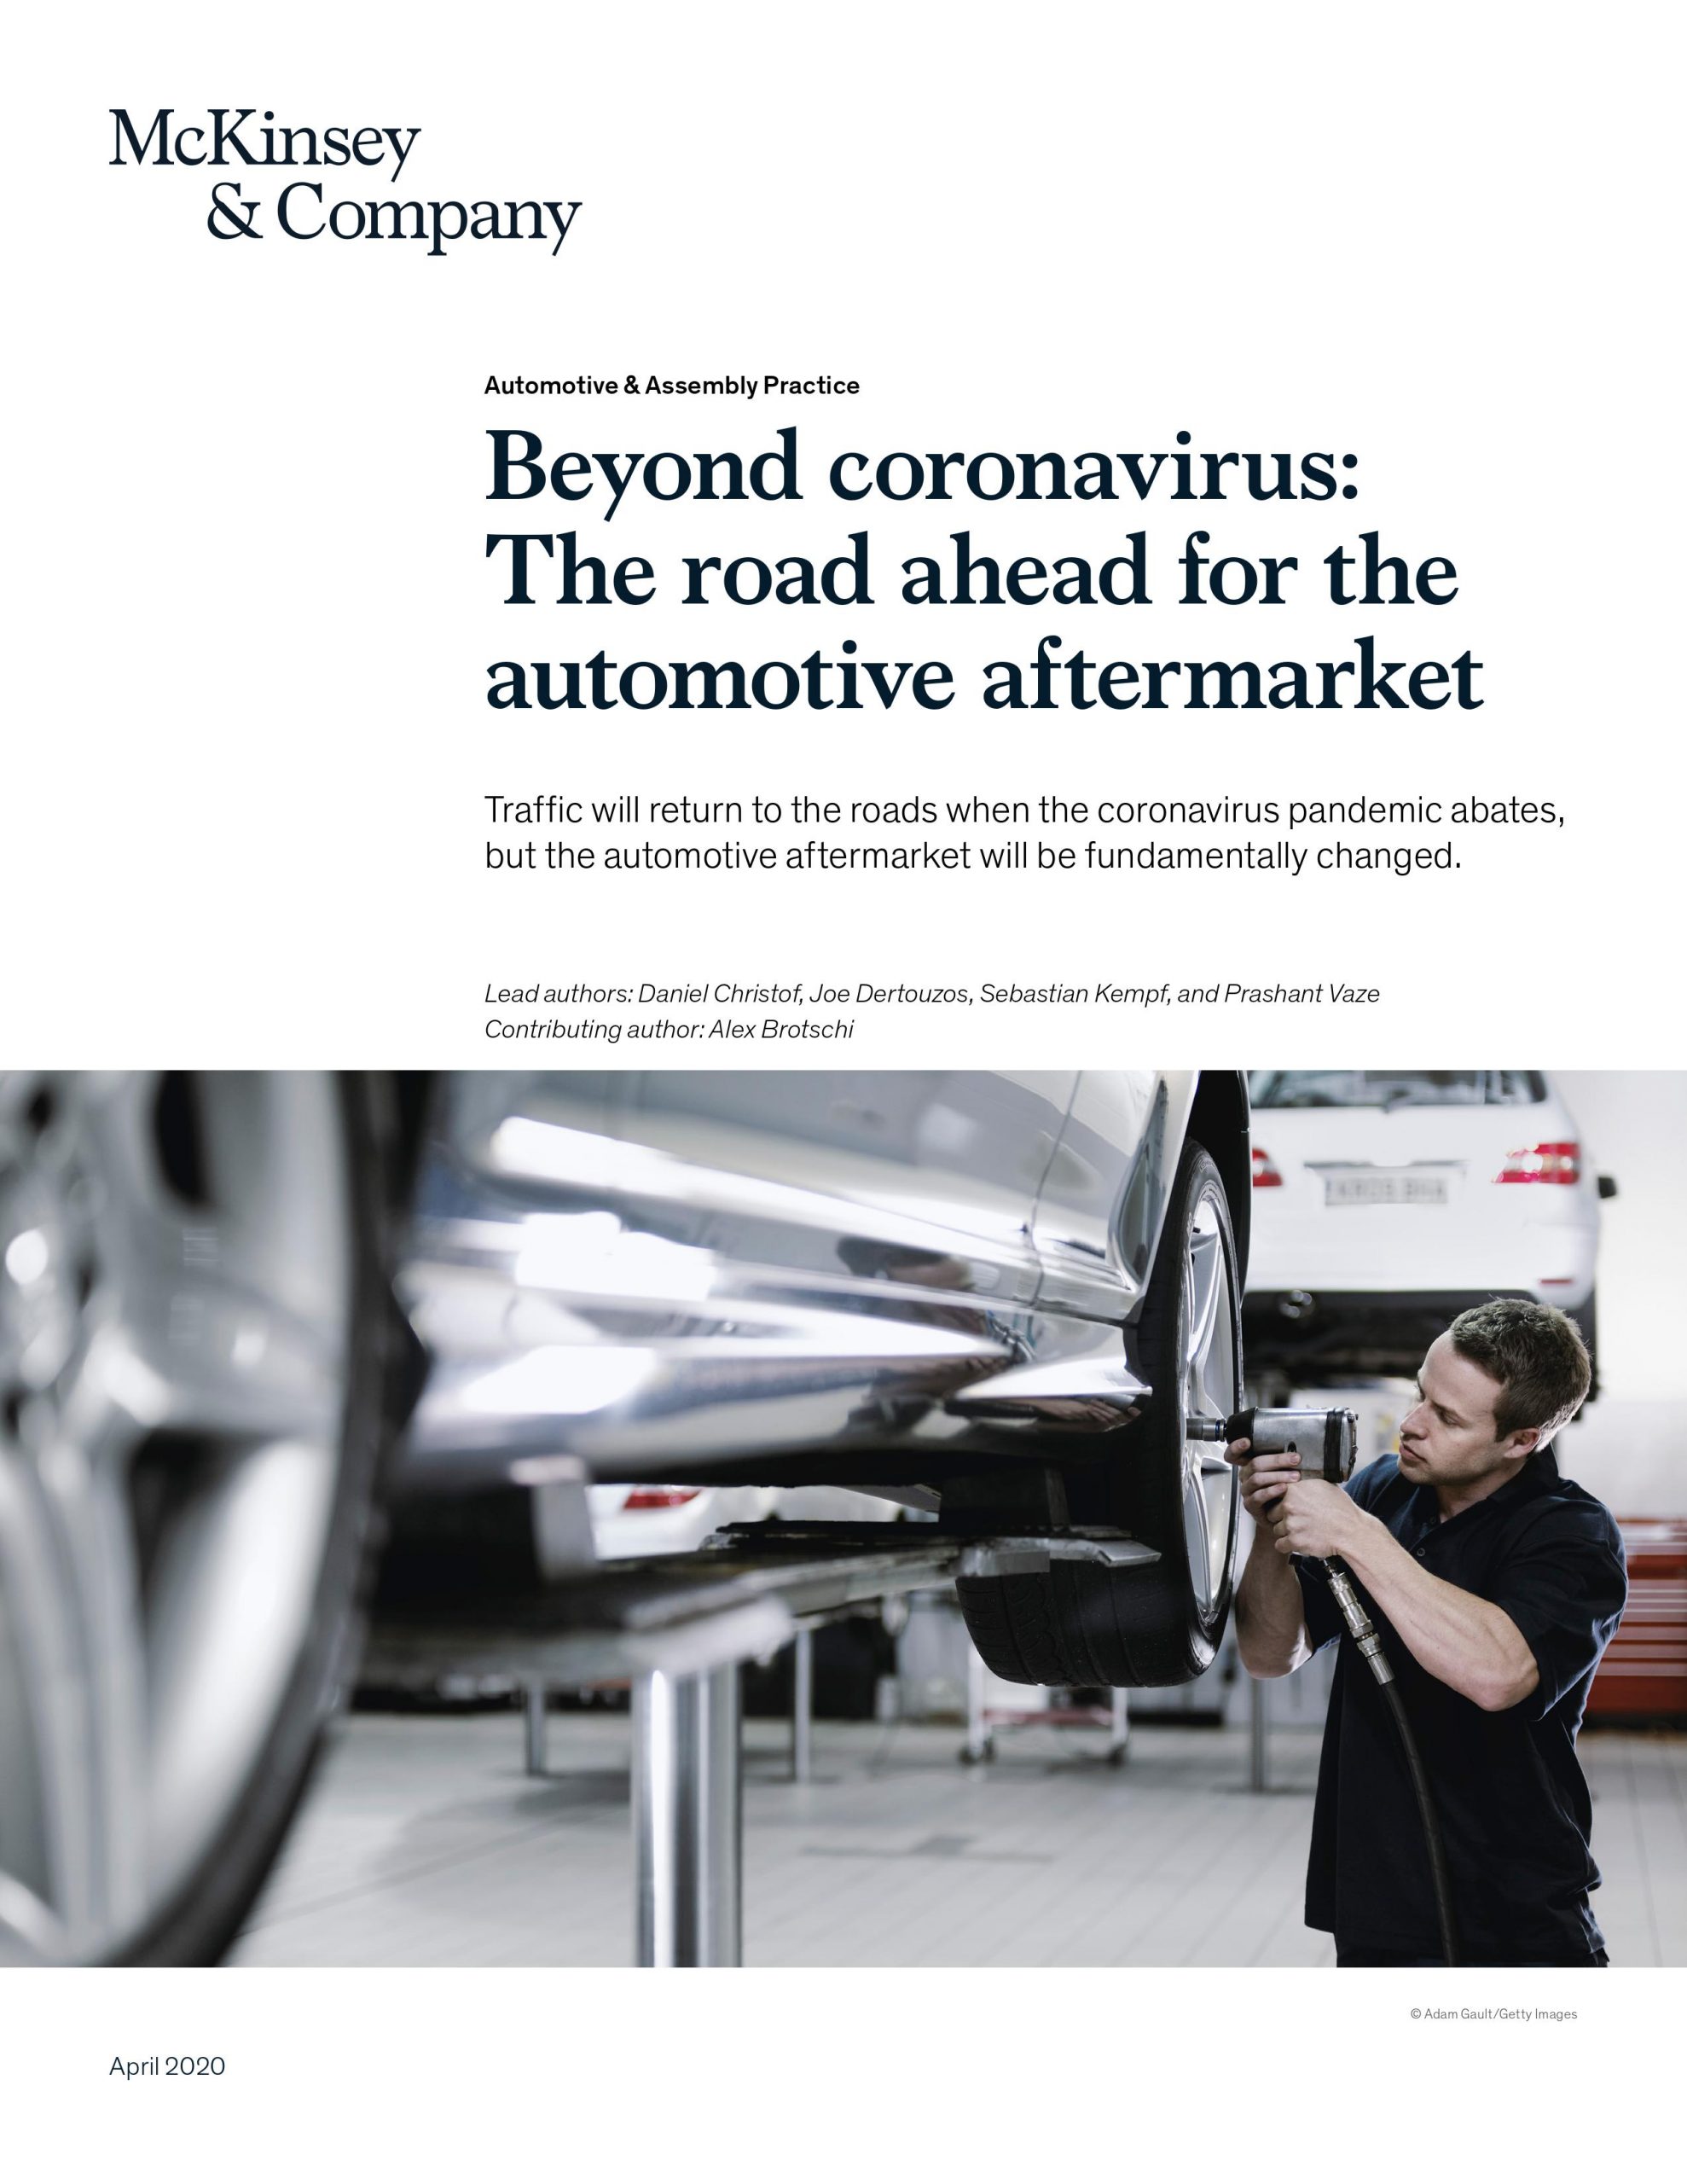 Beyond coronavirus: The road ahead for the automotive aftermarket